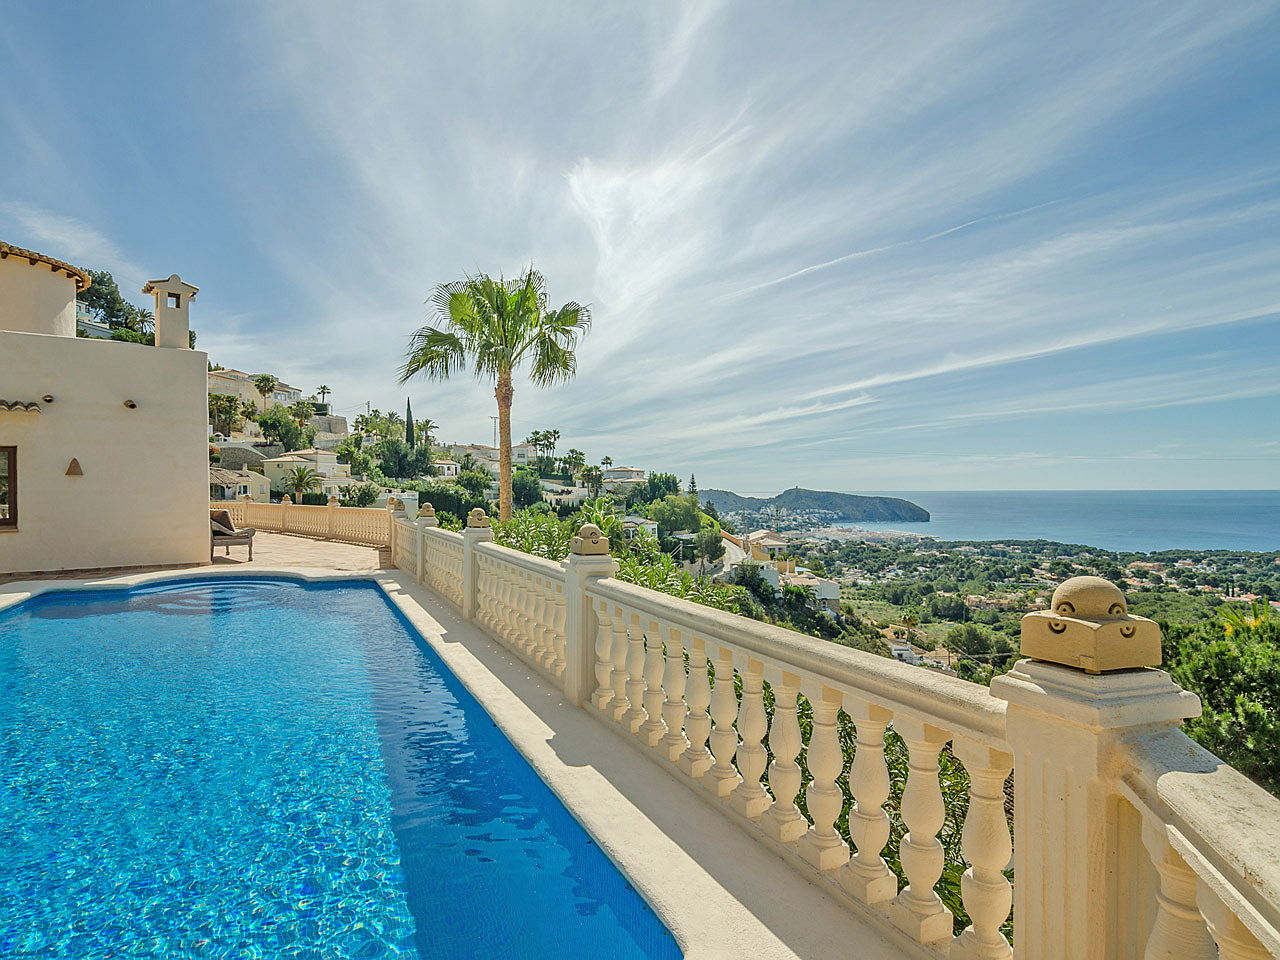  Calpe, Costa Blanca
- This unique high quality luxury property is located in one of the most desirable residential areas at the Costa Blanca and offers stunning panoramic sea views.